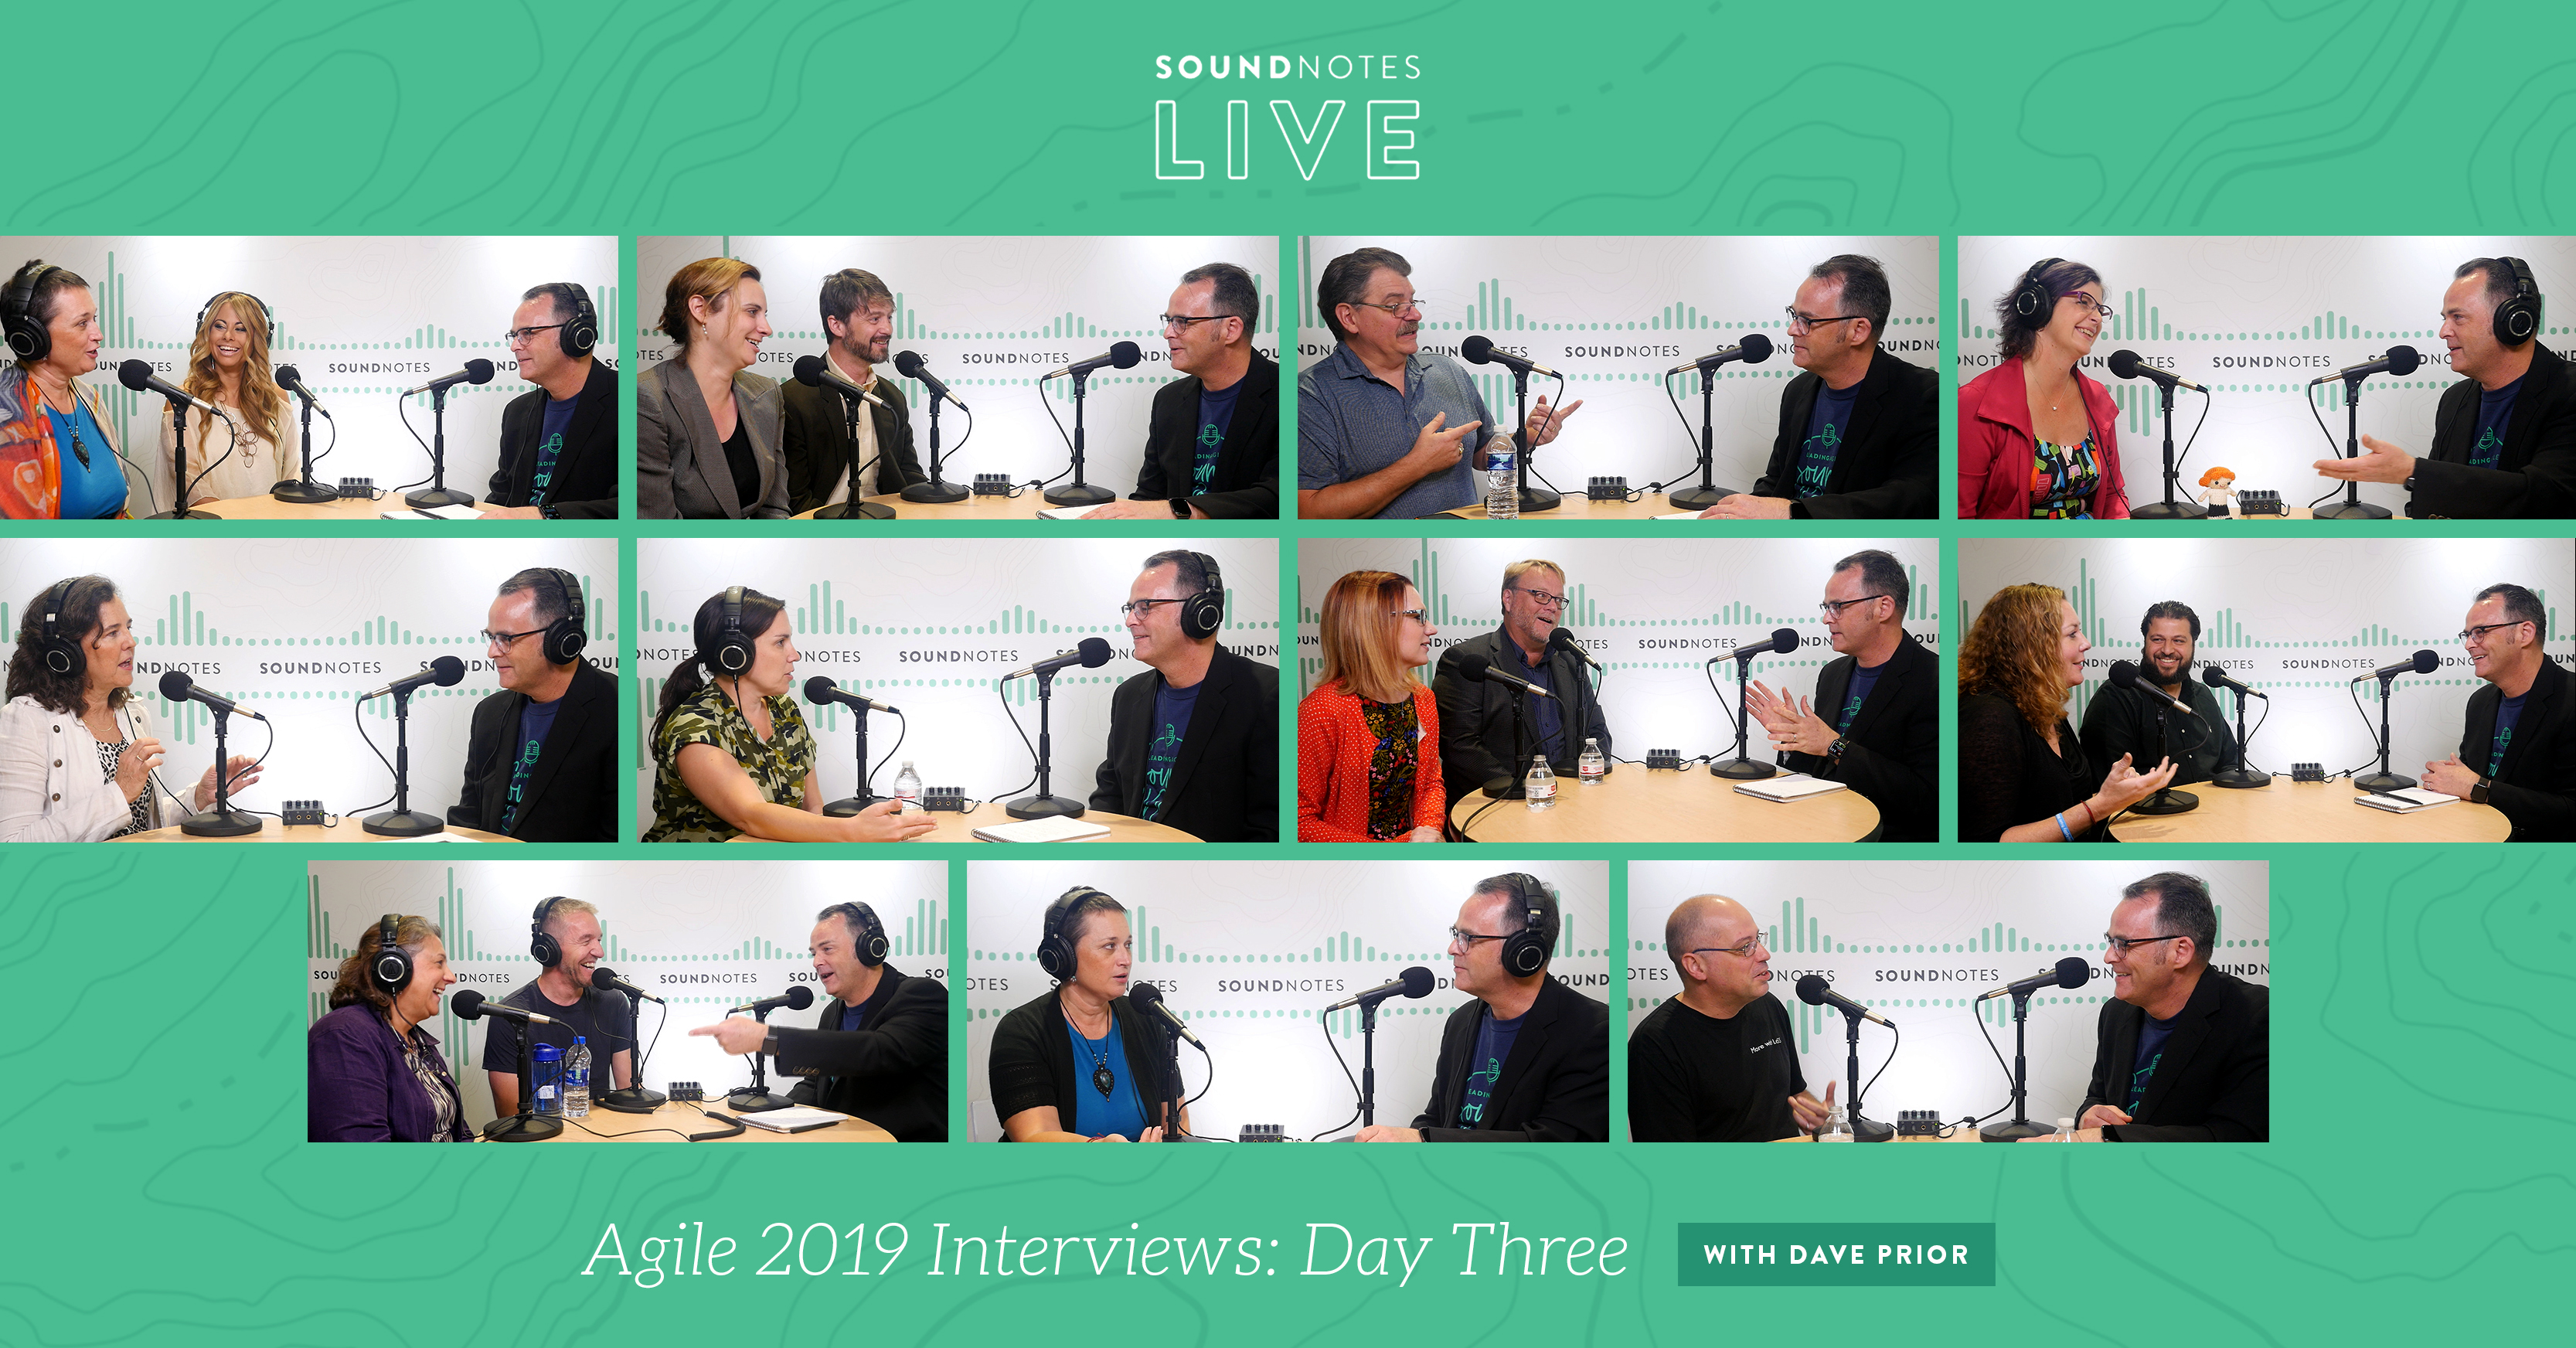 SoundNotes Live at Agile 2019: Day Three